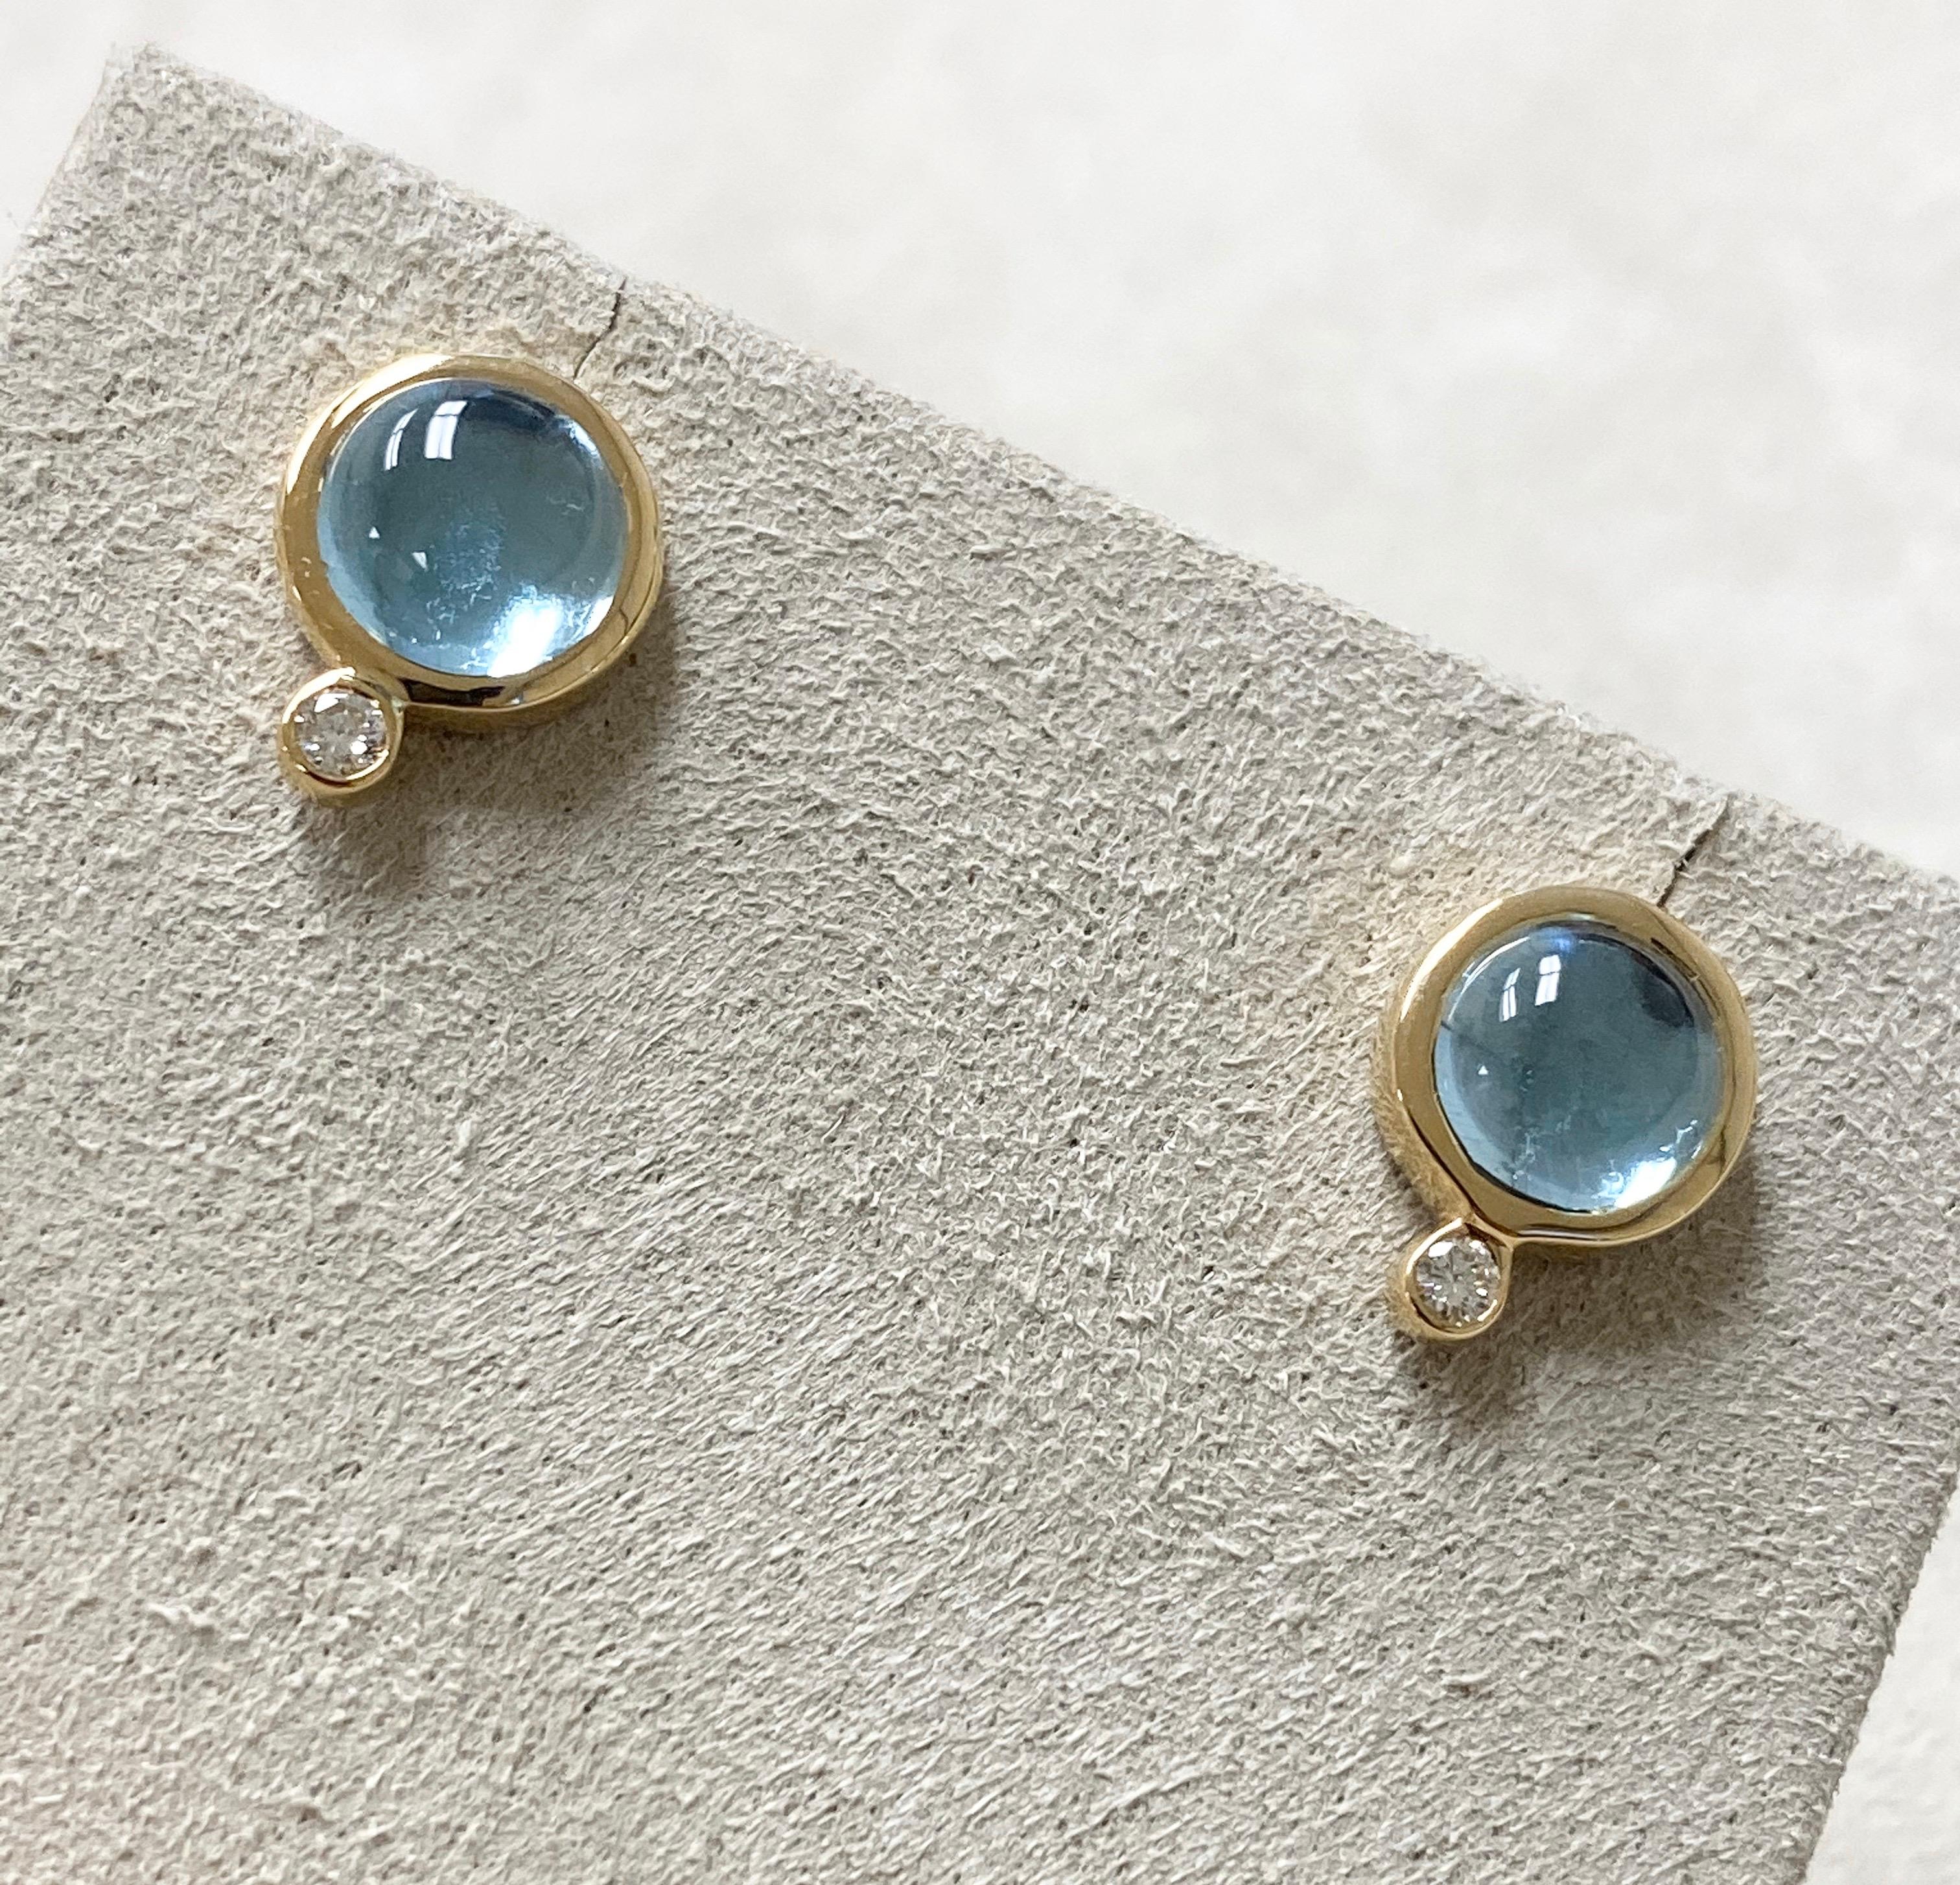 Created in 18 karat yellow gold
Blue topaz 4 cts approx
Diamonds 0.10 ct approx
Can be worn at different angles
Limited edition

Pure elegance in a limited edition design, these 18 karat yellow gold earrings feature a captivating 4ct Candy Blue